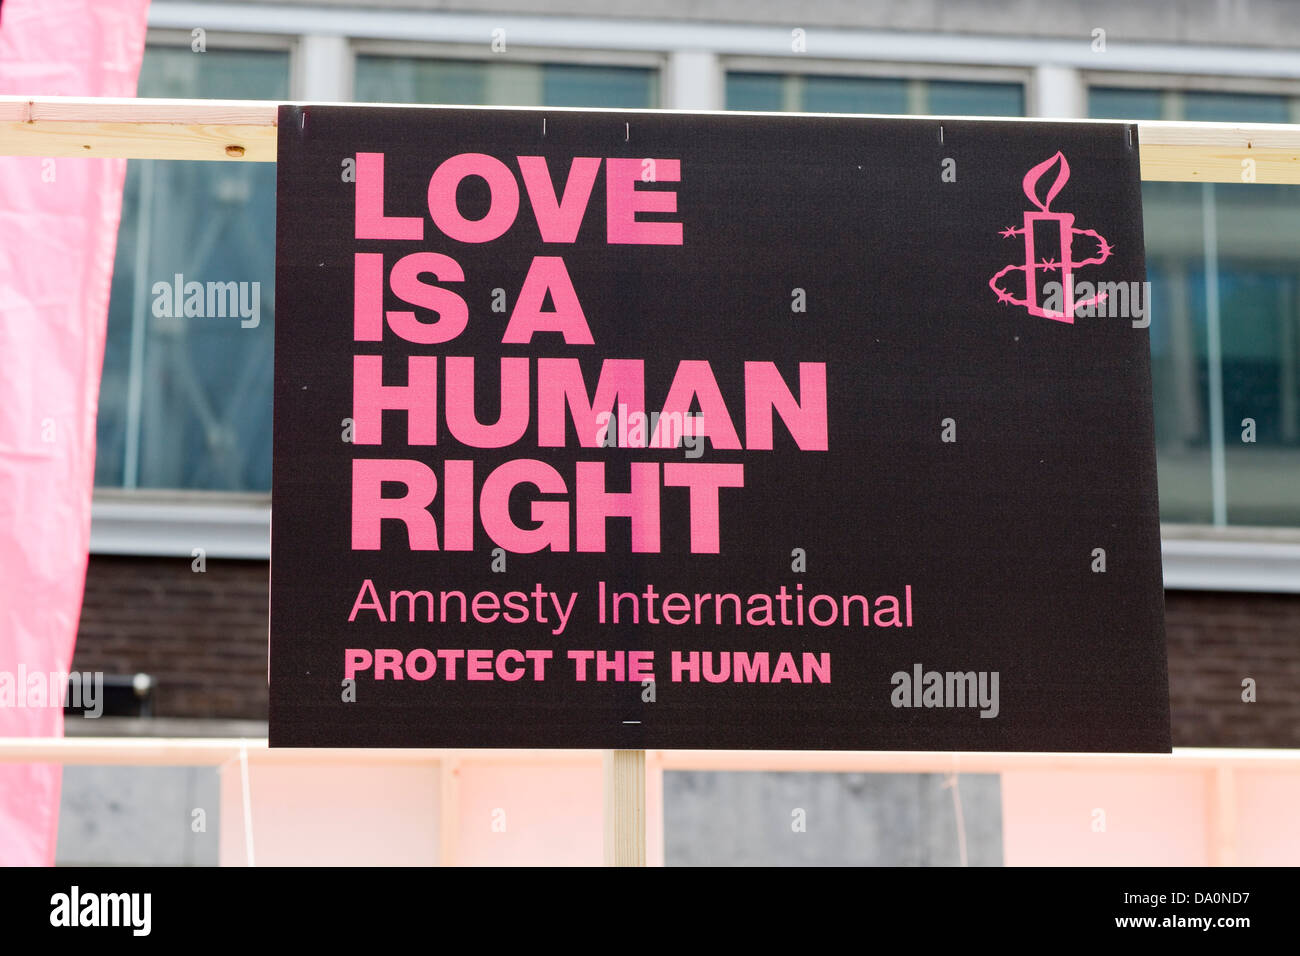 Information Signs 'Love is a Human Right' Amnesty international Protect the Human Stock Photo